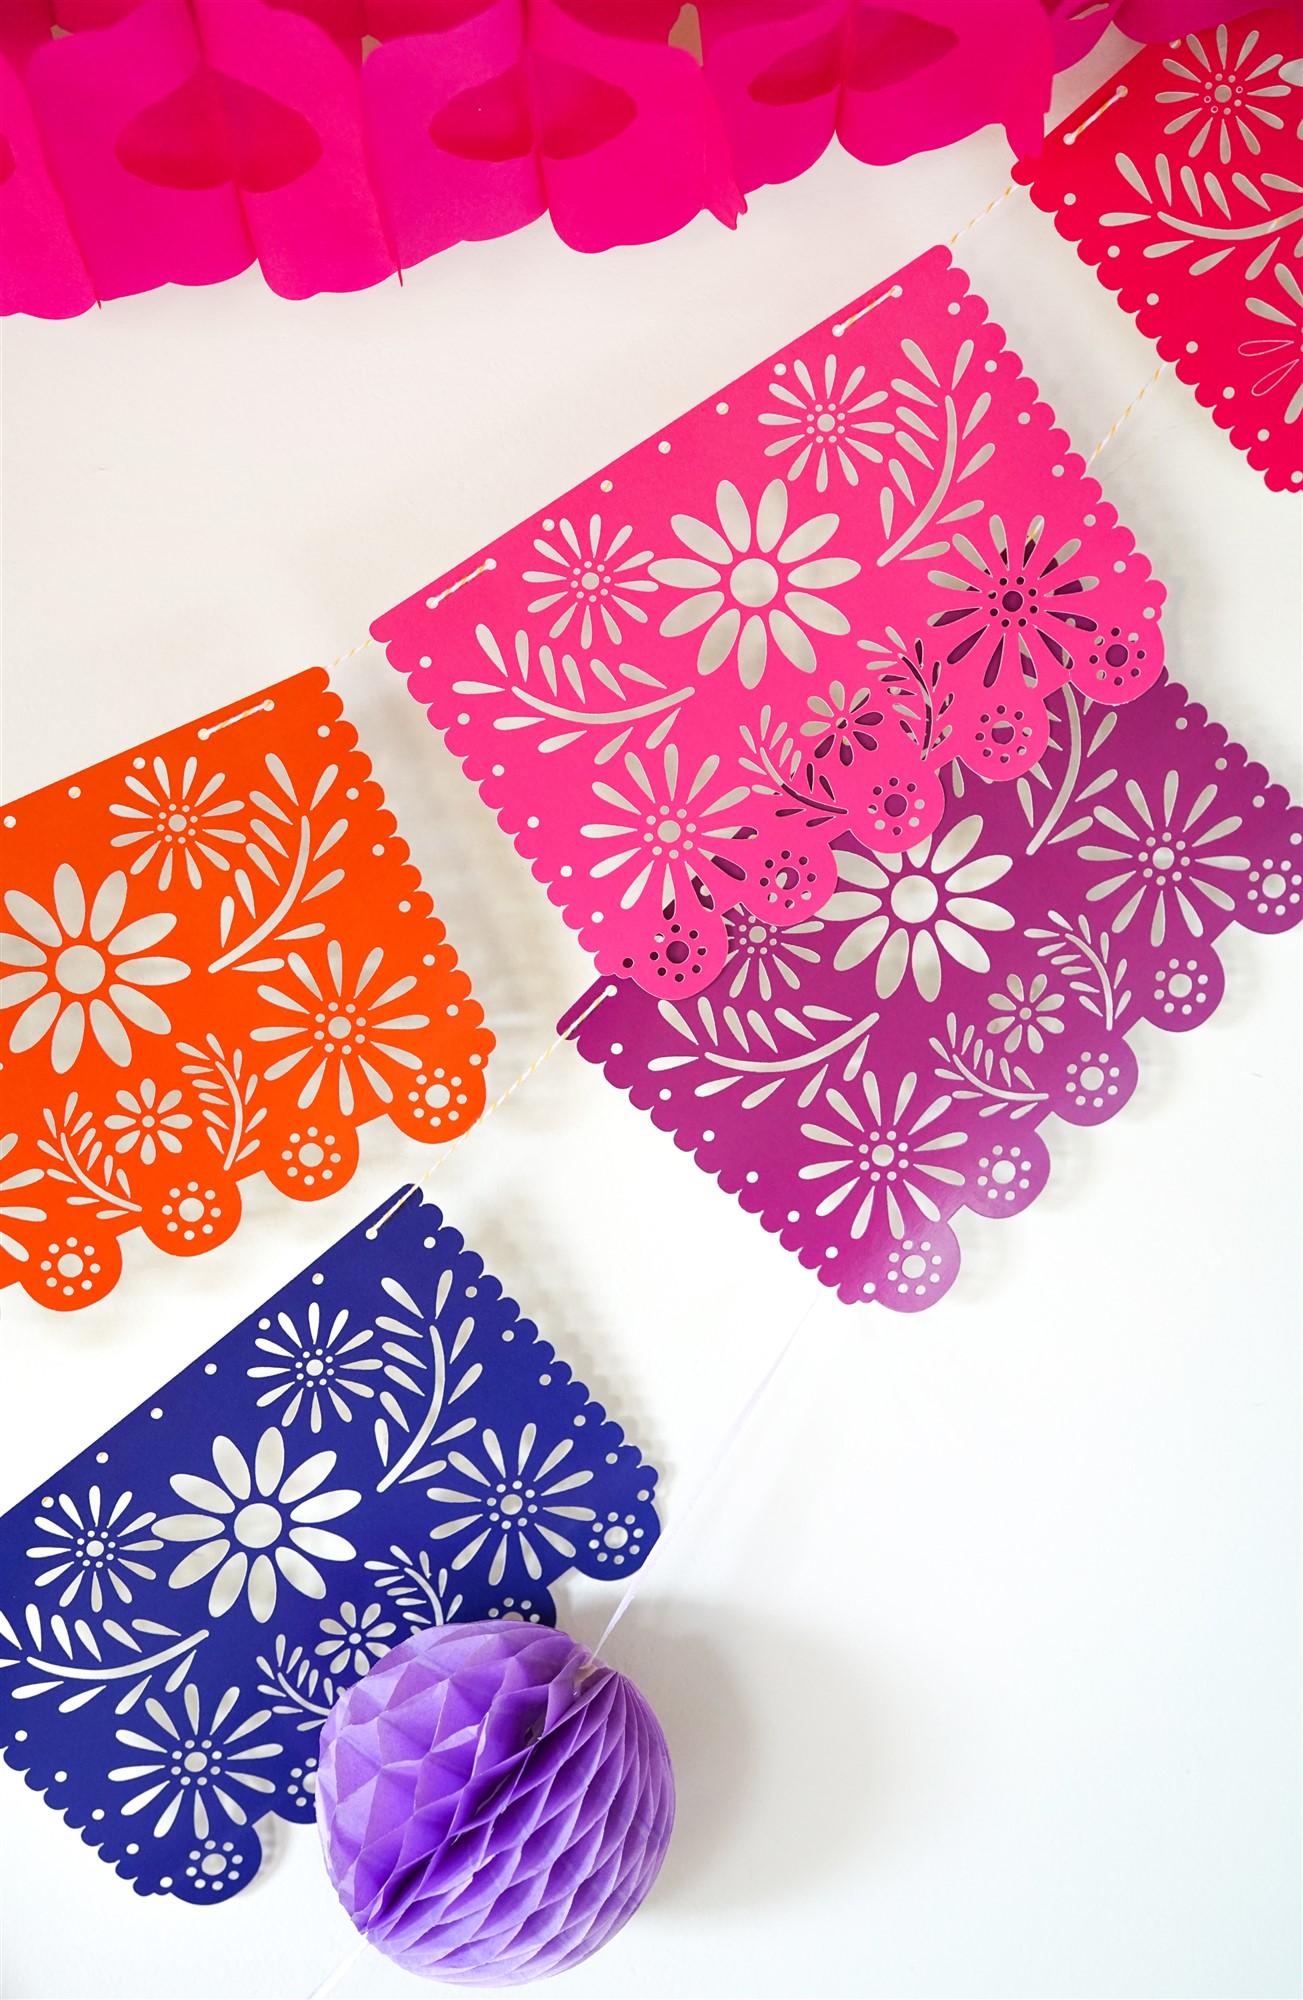 FREE DIY SVG files from images: Papel Picado Svg Free : Mexican Floral Papel  Picado Transparent Png Svg Vector File / Free box svg files, free card svg  files.